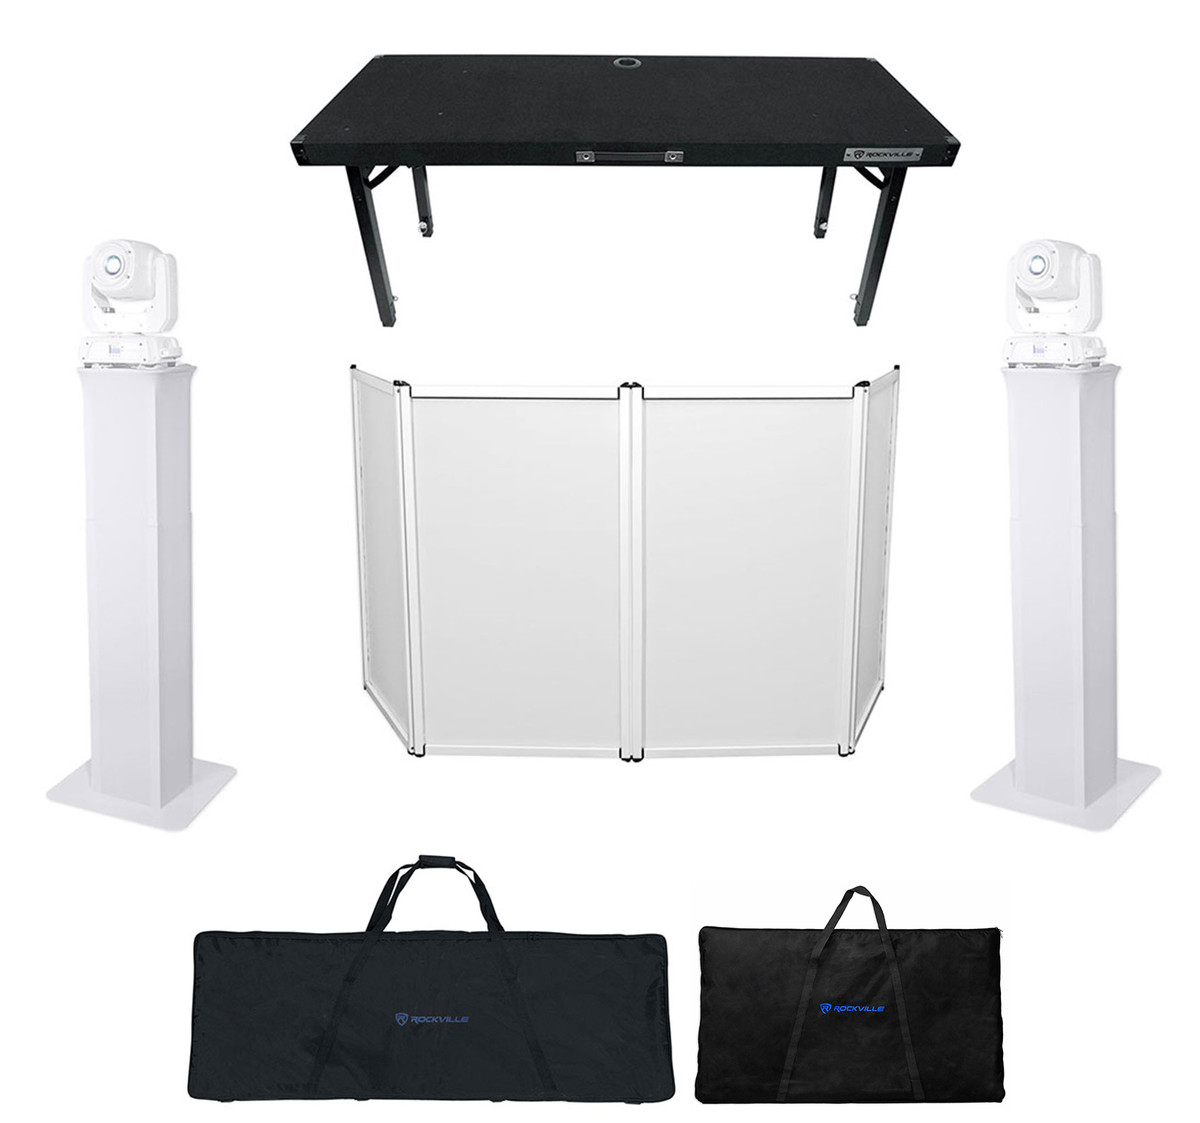 5 Panel - White Frame DJ Facade W-SS Quick Release 180° Hinges – Pro Audio  and Lighting